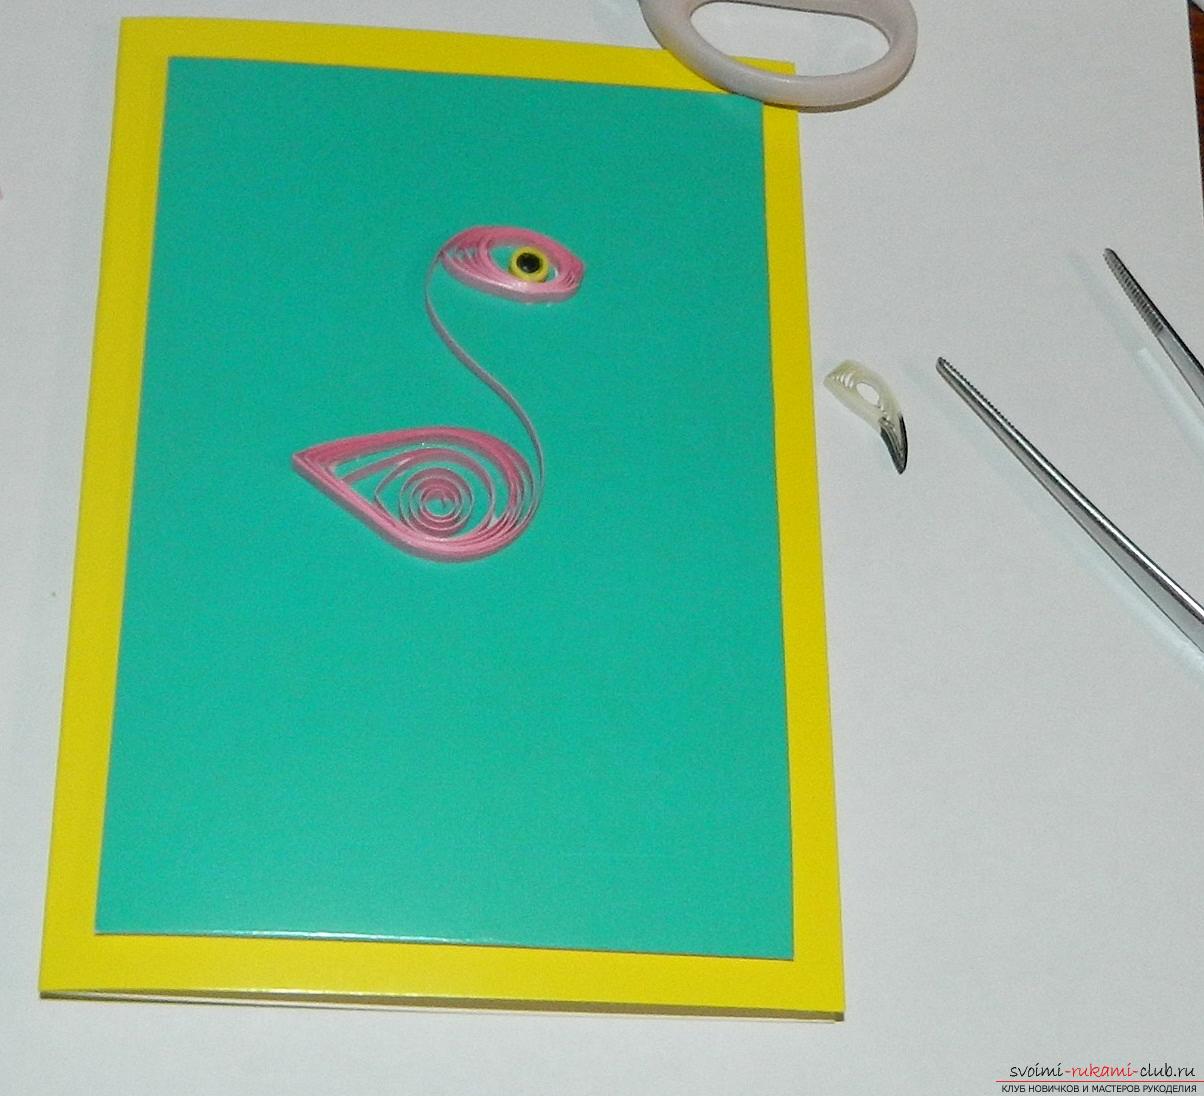 This master class will teach you how to make beautiful cards with flamingos yourself. Photo # 10